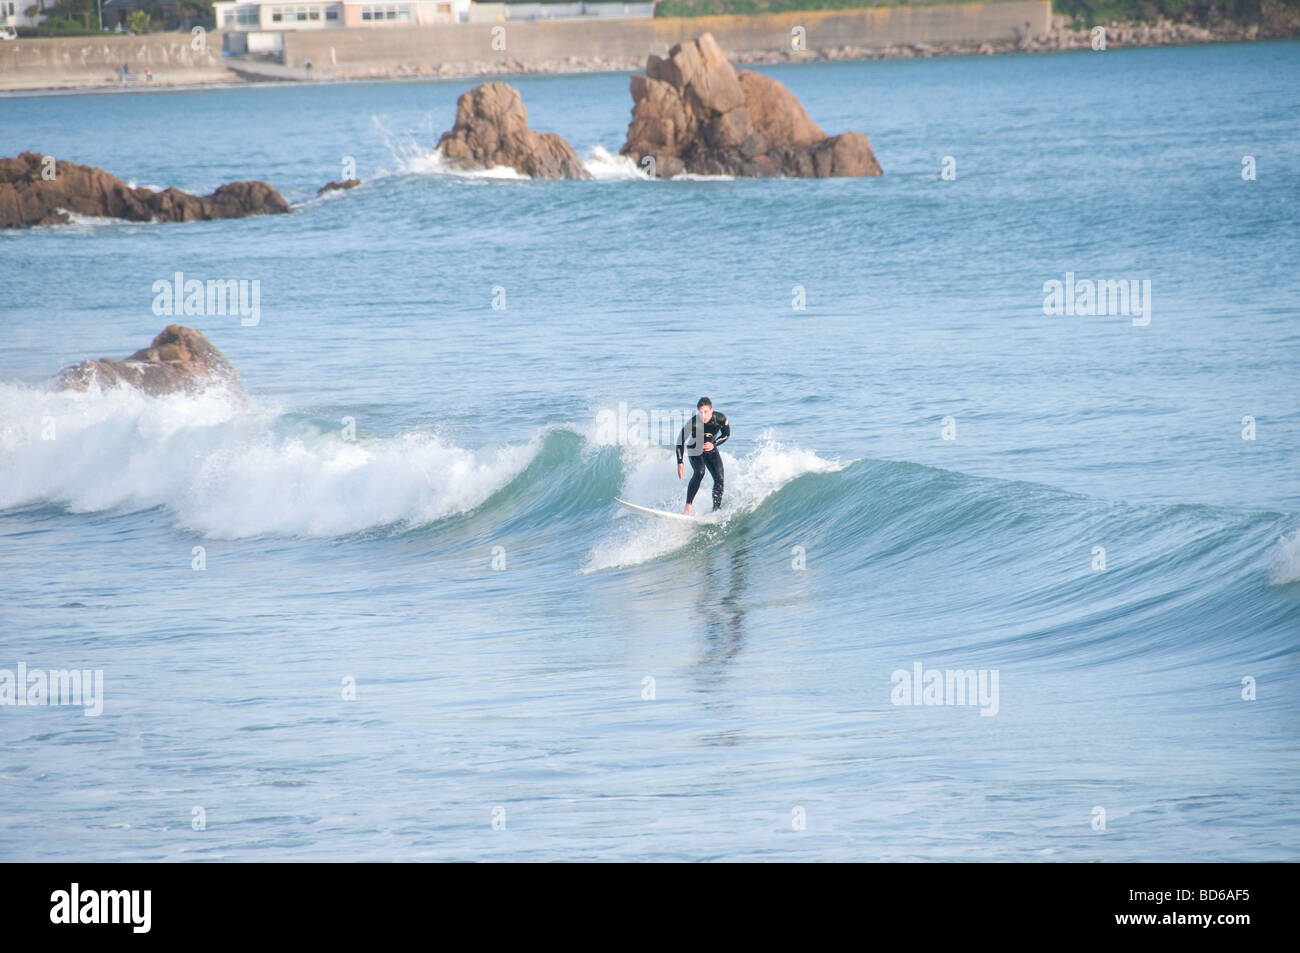 Surfing at St Brelades bay, Jersey, Channel Isles Stock Photo